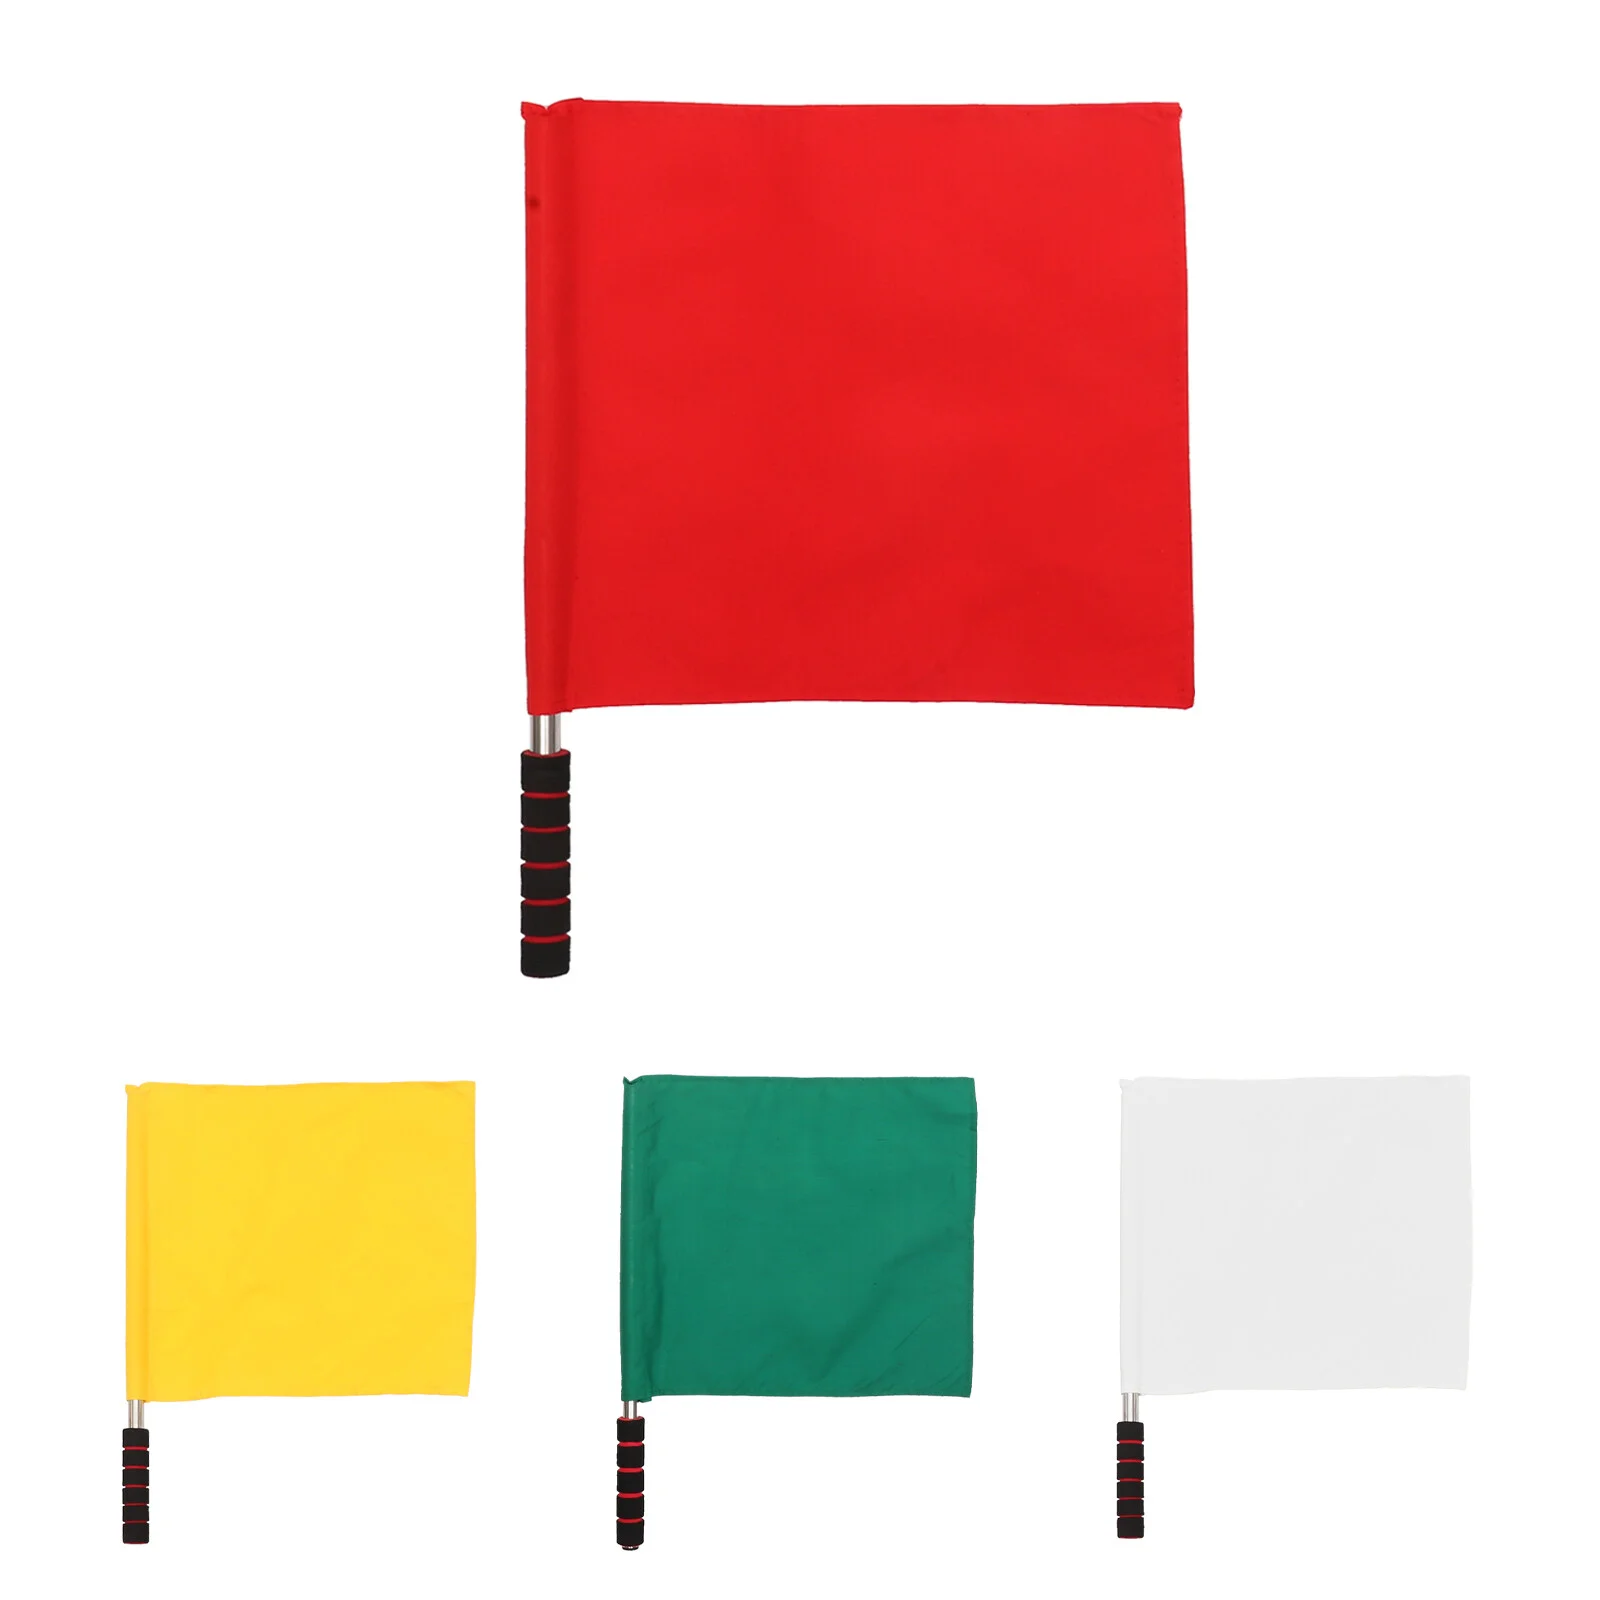 

4 Pcs Racing Car Race Signal Flags Football Colored Referee Competition Conducting Sports Match Starting